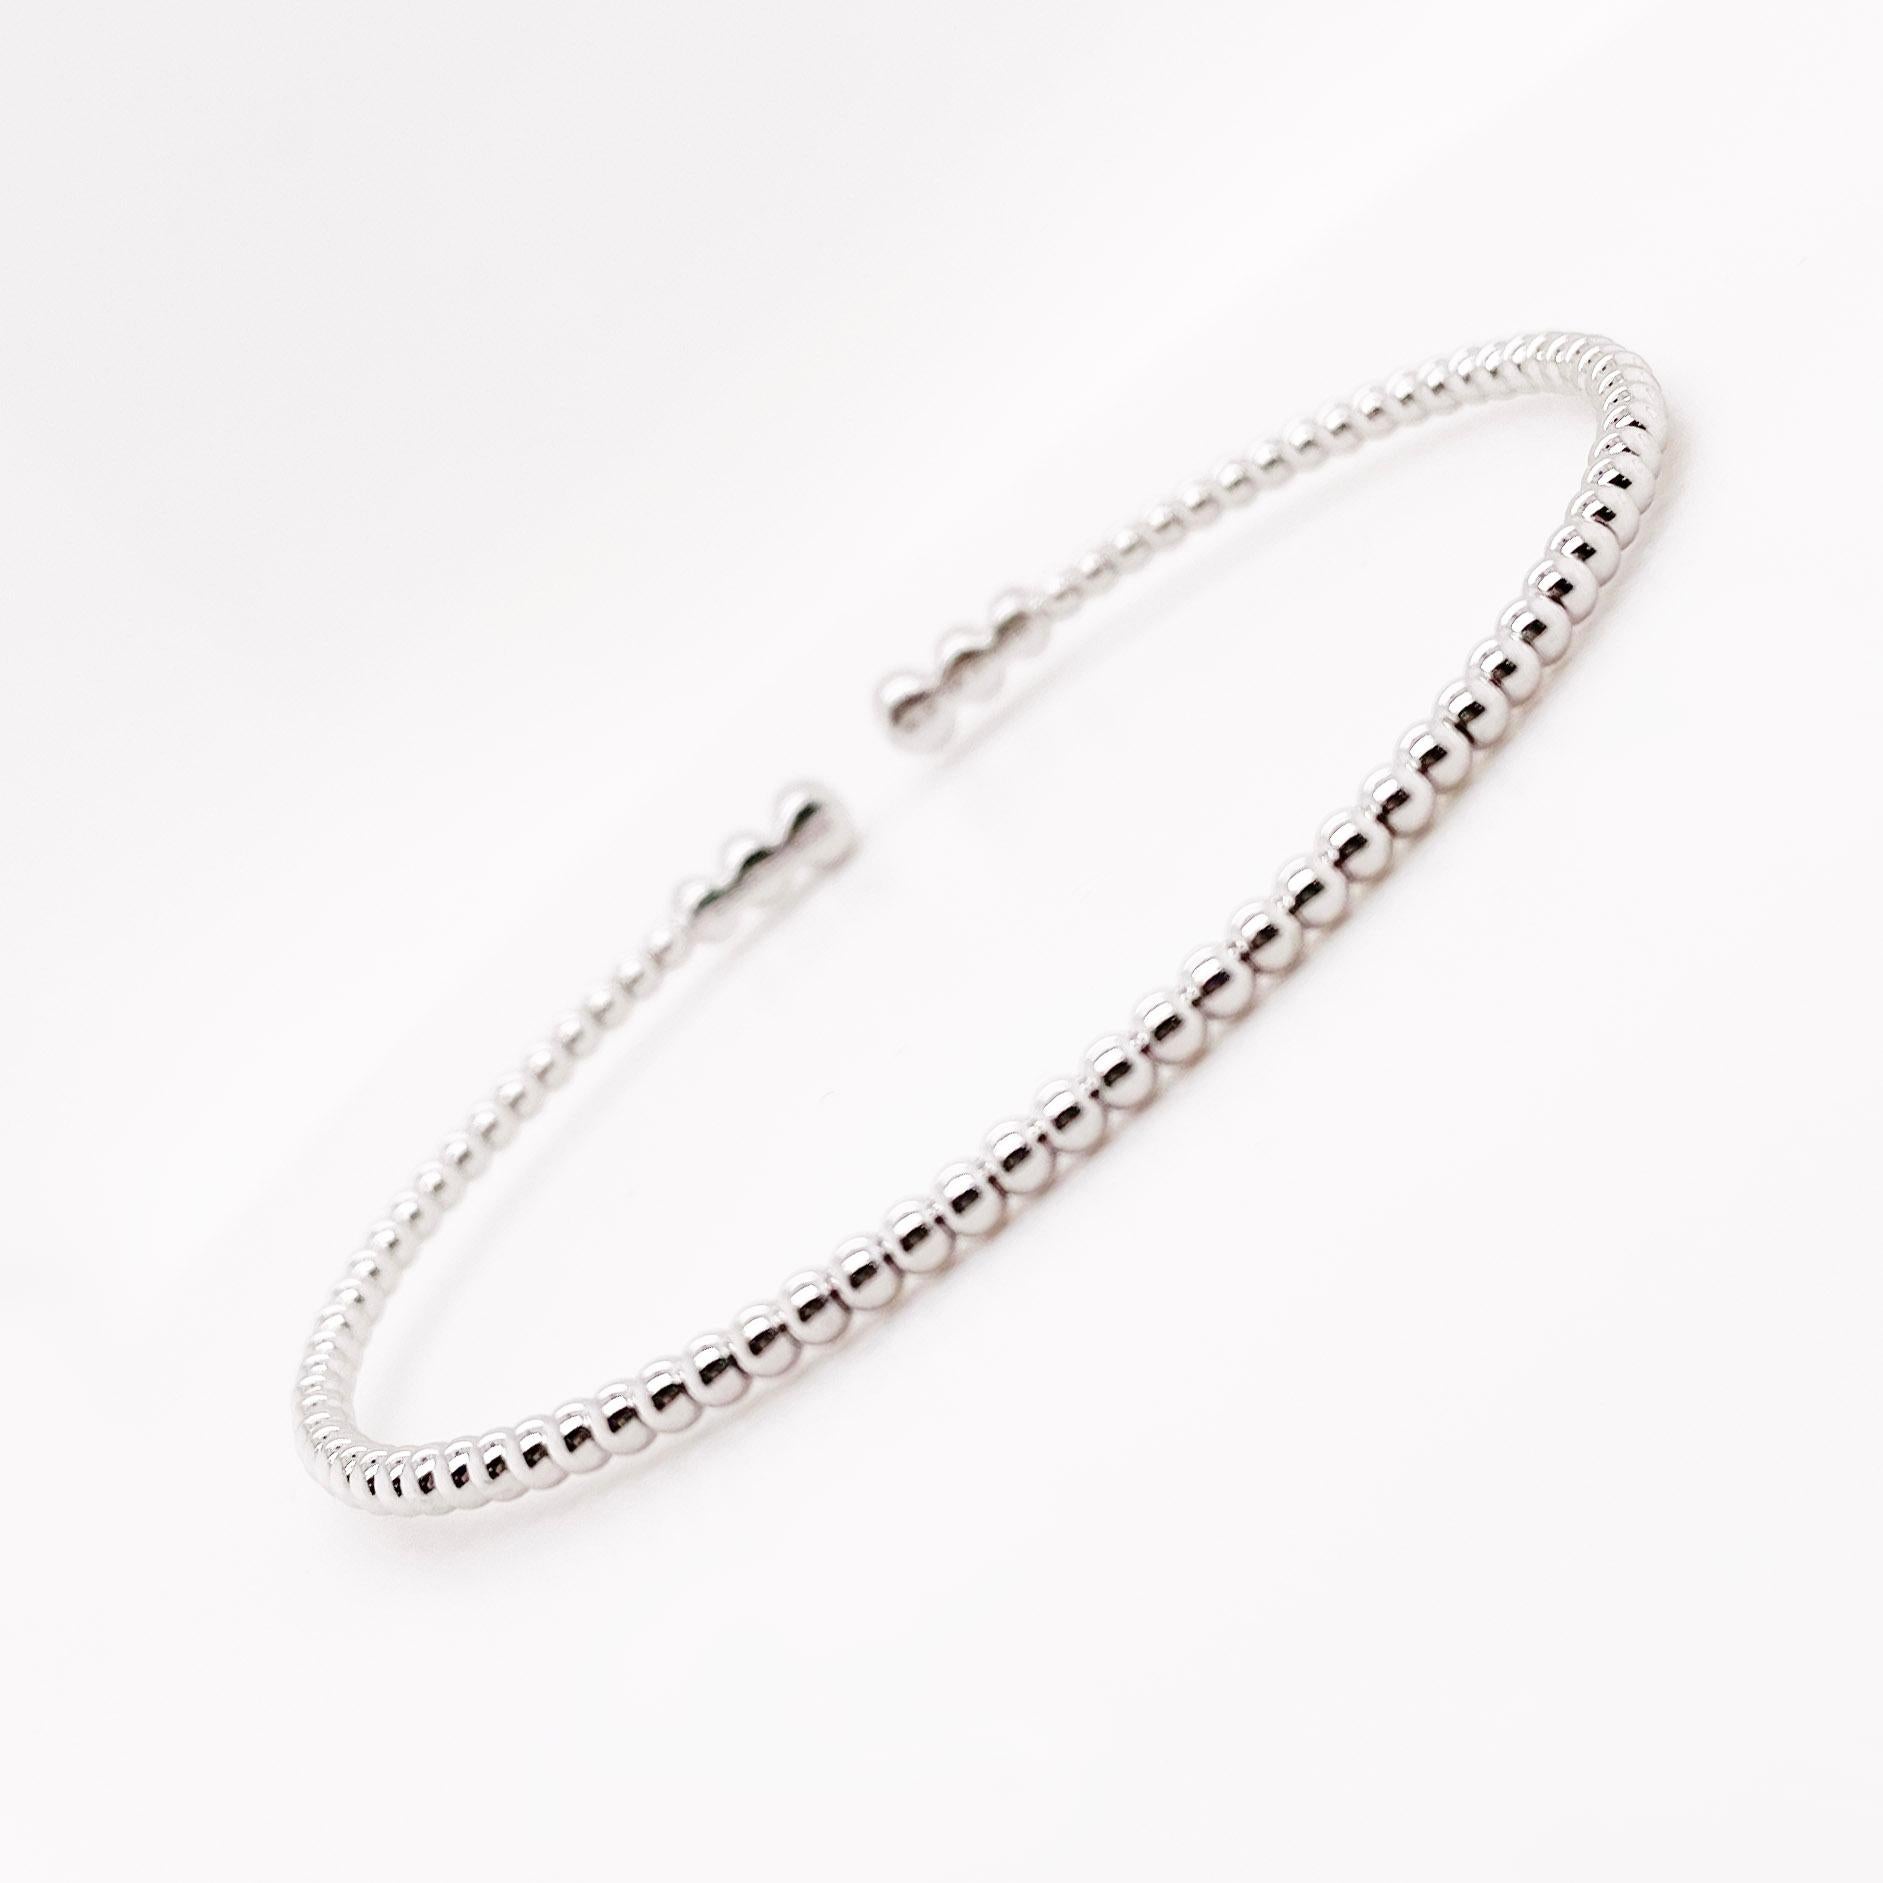 This 14k white gold flex bracelet has 6 diamonds on the top of the bracelet and the rest of the design is beaded.  The patented wire design does not require a clasp as the 14 karat wire hugs your wrist. Many times people will pair this bracelet with